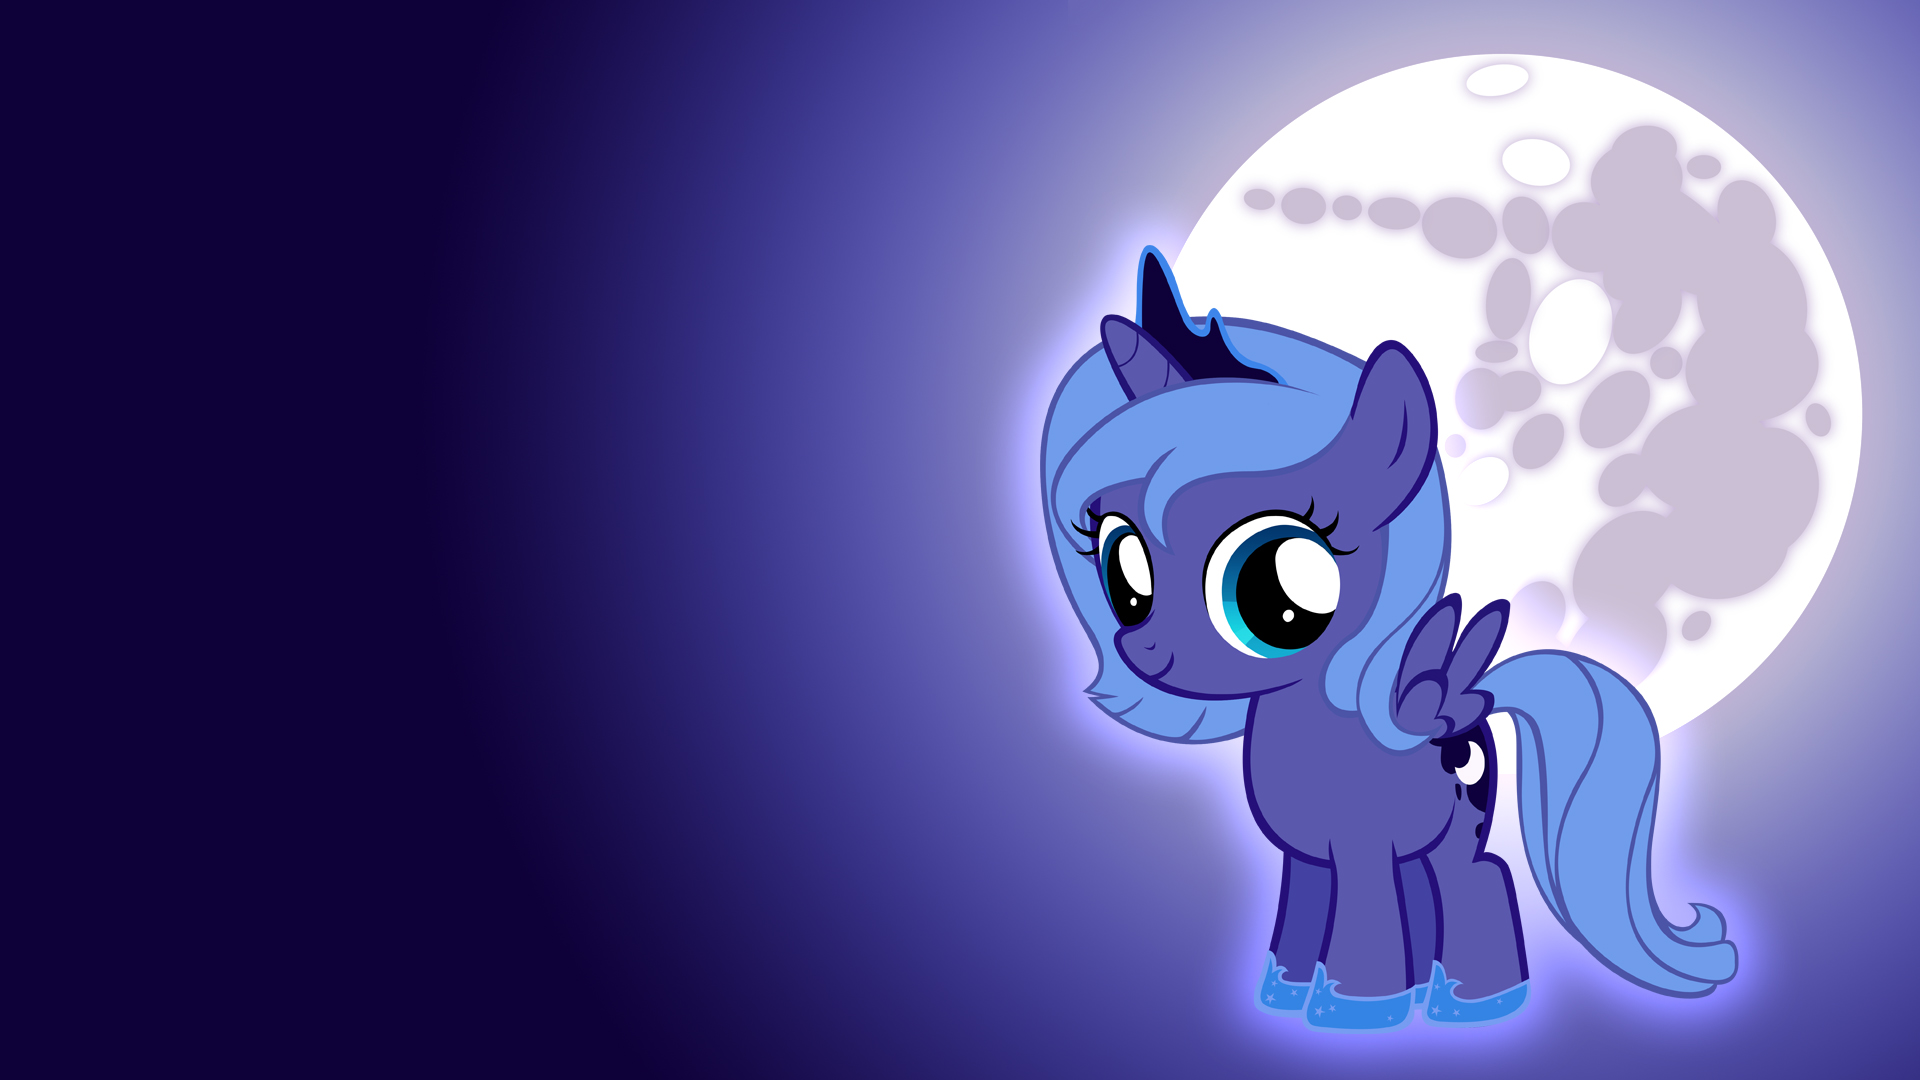 Filly Luna Wallpaper by MoongazePonies, Pappkarton and SpiritofthwWolf